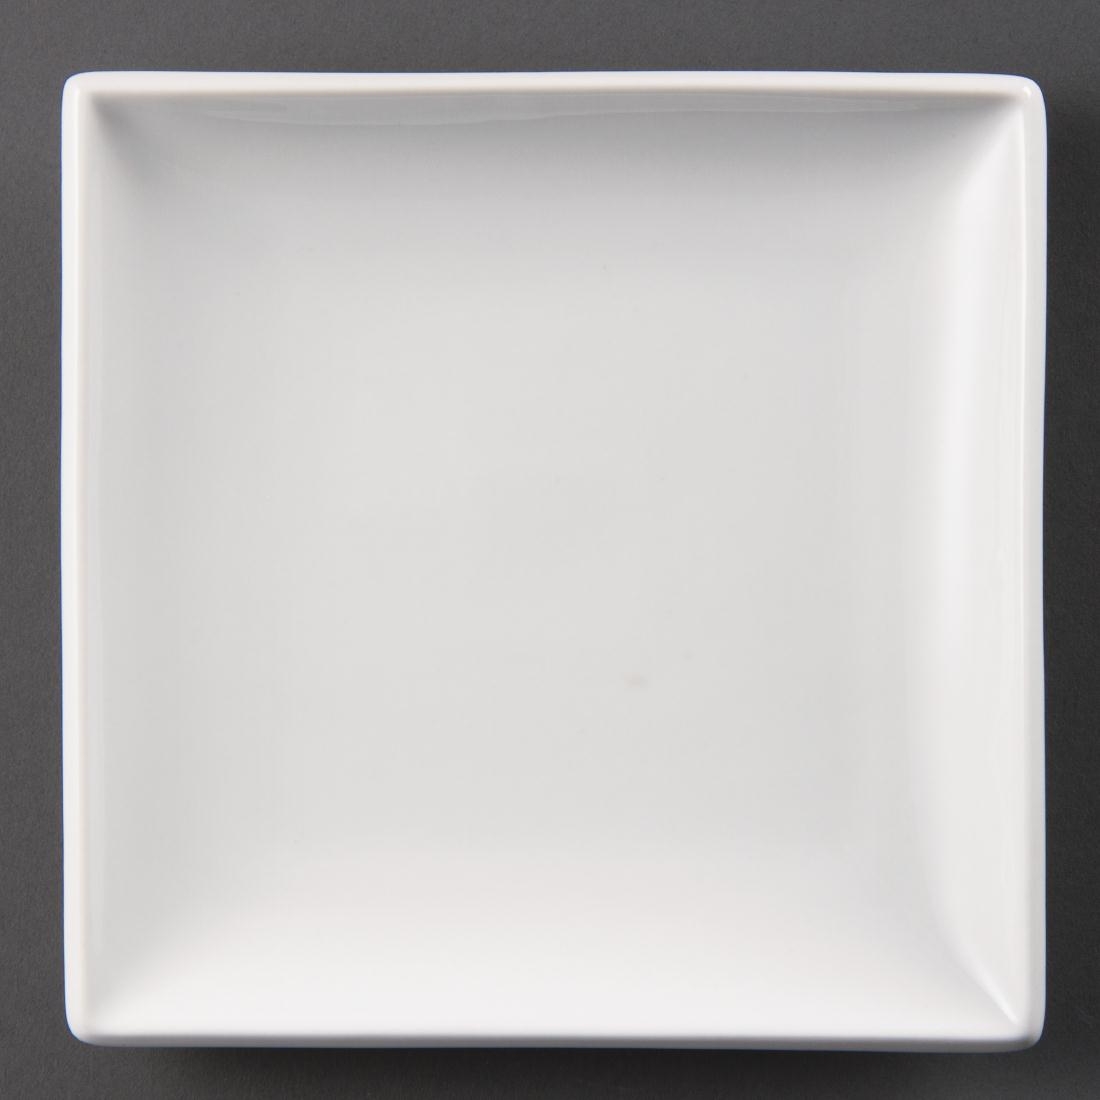 Olympia Whiteware Square Plates 180mm